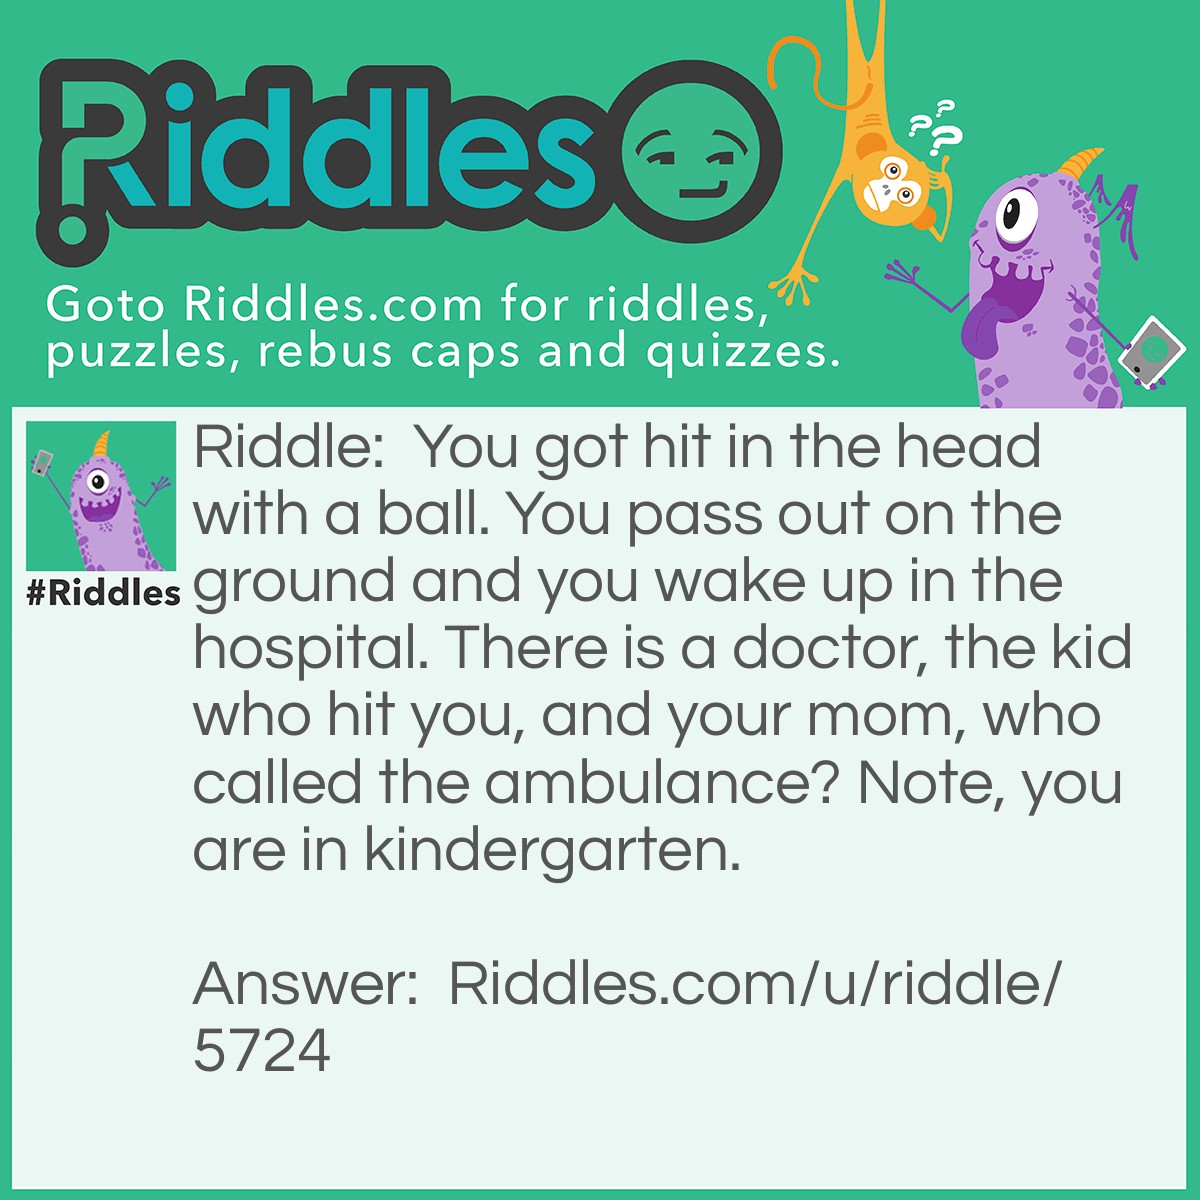 Riddle: You got hit in the head with a ball. You pass out on the ground and you wake up in the hospital. There is a doctor, the kid who hit you, and your mom, who called the ambulance? Note, you are in <a href="https://www.riddles.com/post/71/riddles-for-kindergartners">kindergarten.</a> Answer: The school. The kid did not have a cell phone as he was in kindergarten, your mom was not there and you needed to be rushed as you passed out, the doctor was at the hospital so she didn't know, there for the school you were in did.